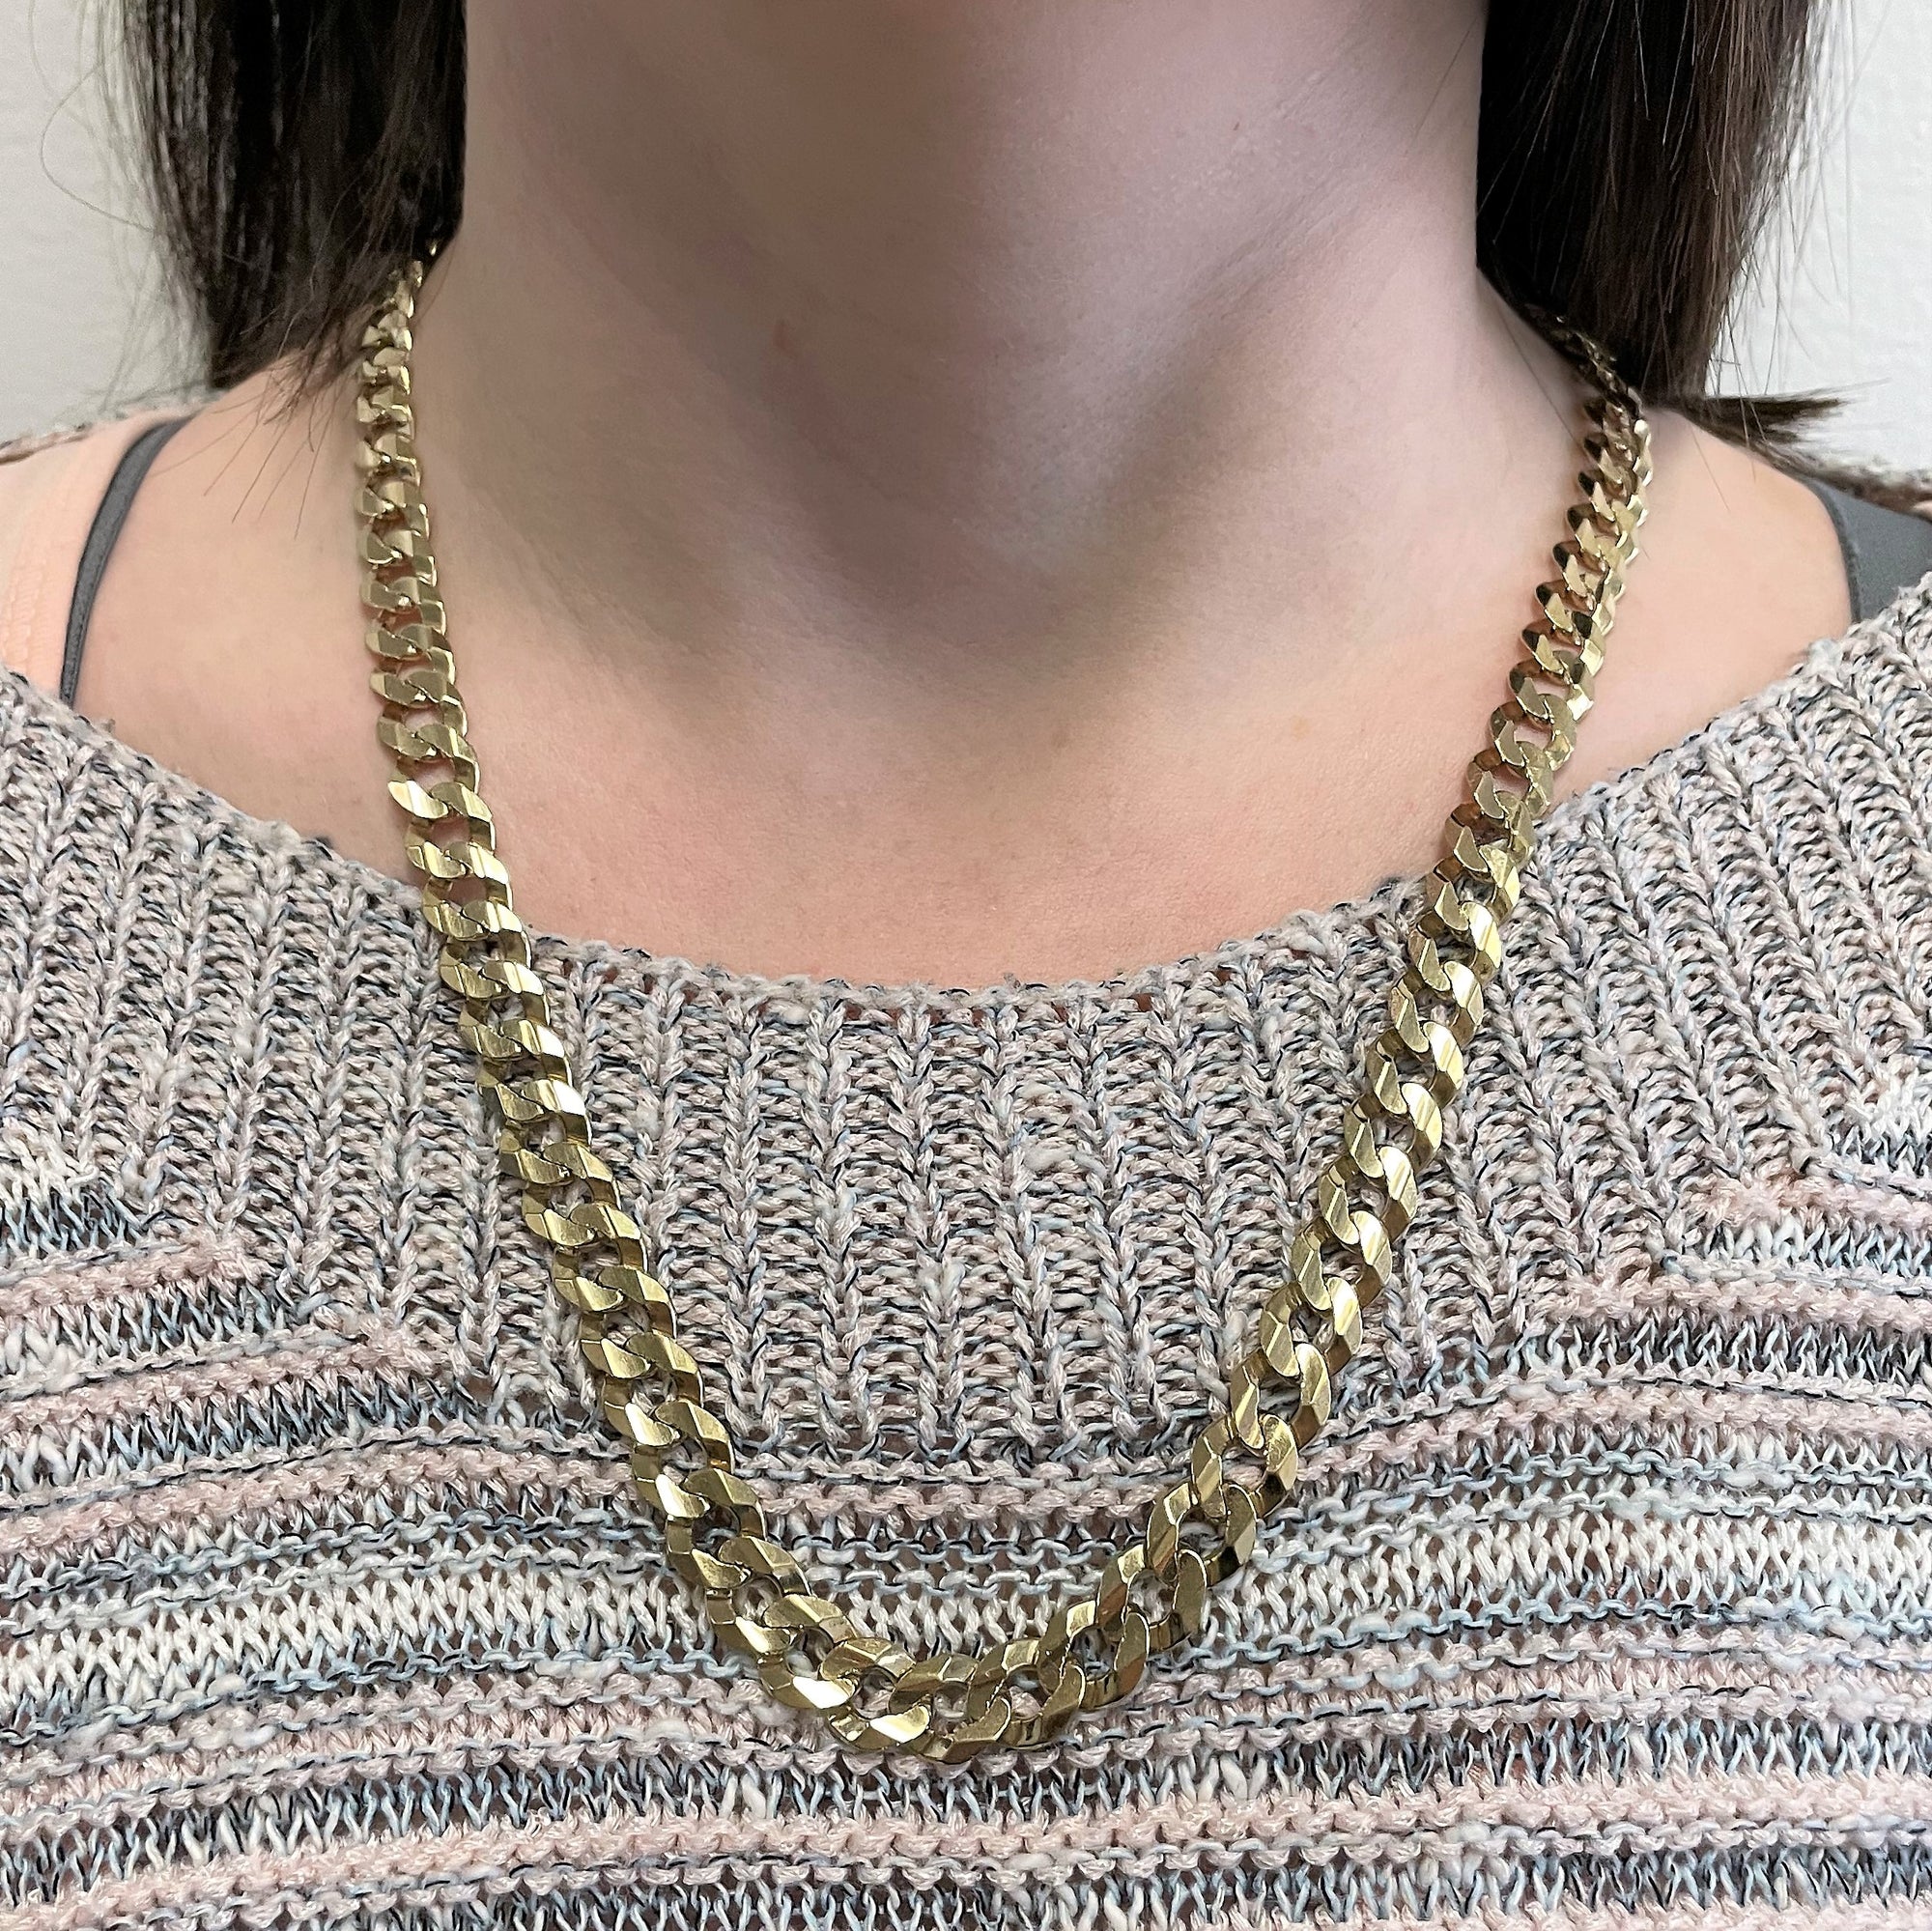 10k Yellow Gold Curb Chain | 22